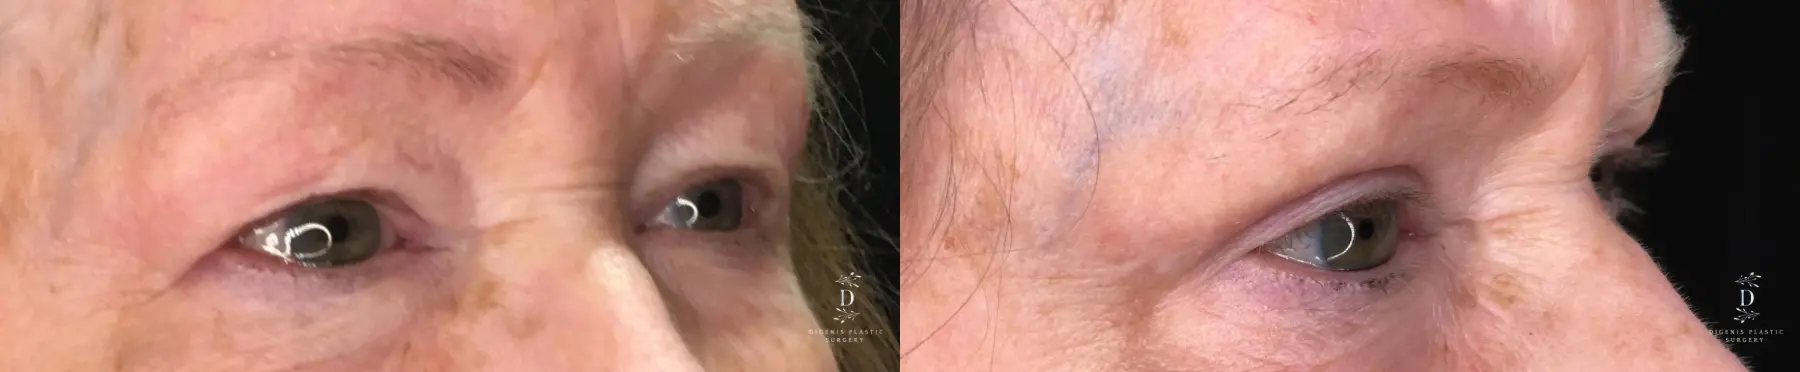 Eyelid Surgery: Patient 25 - Before and After 2